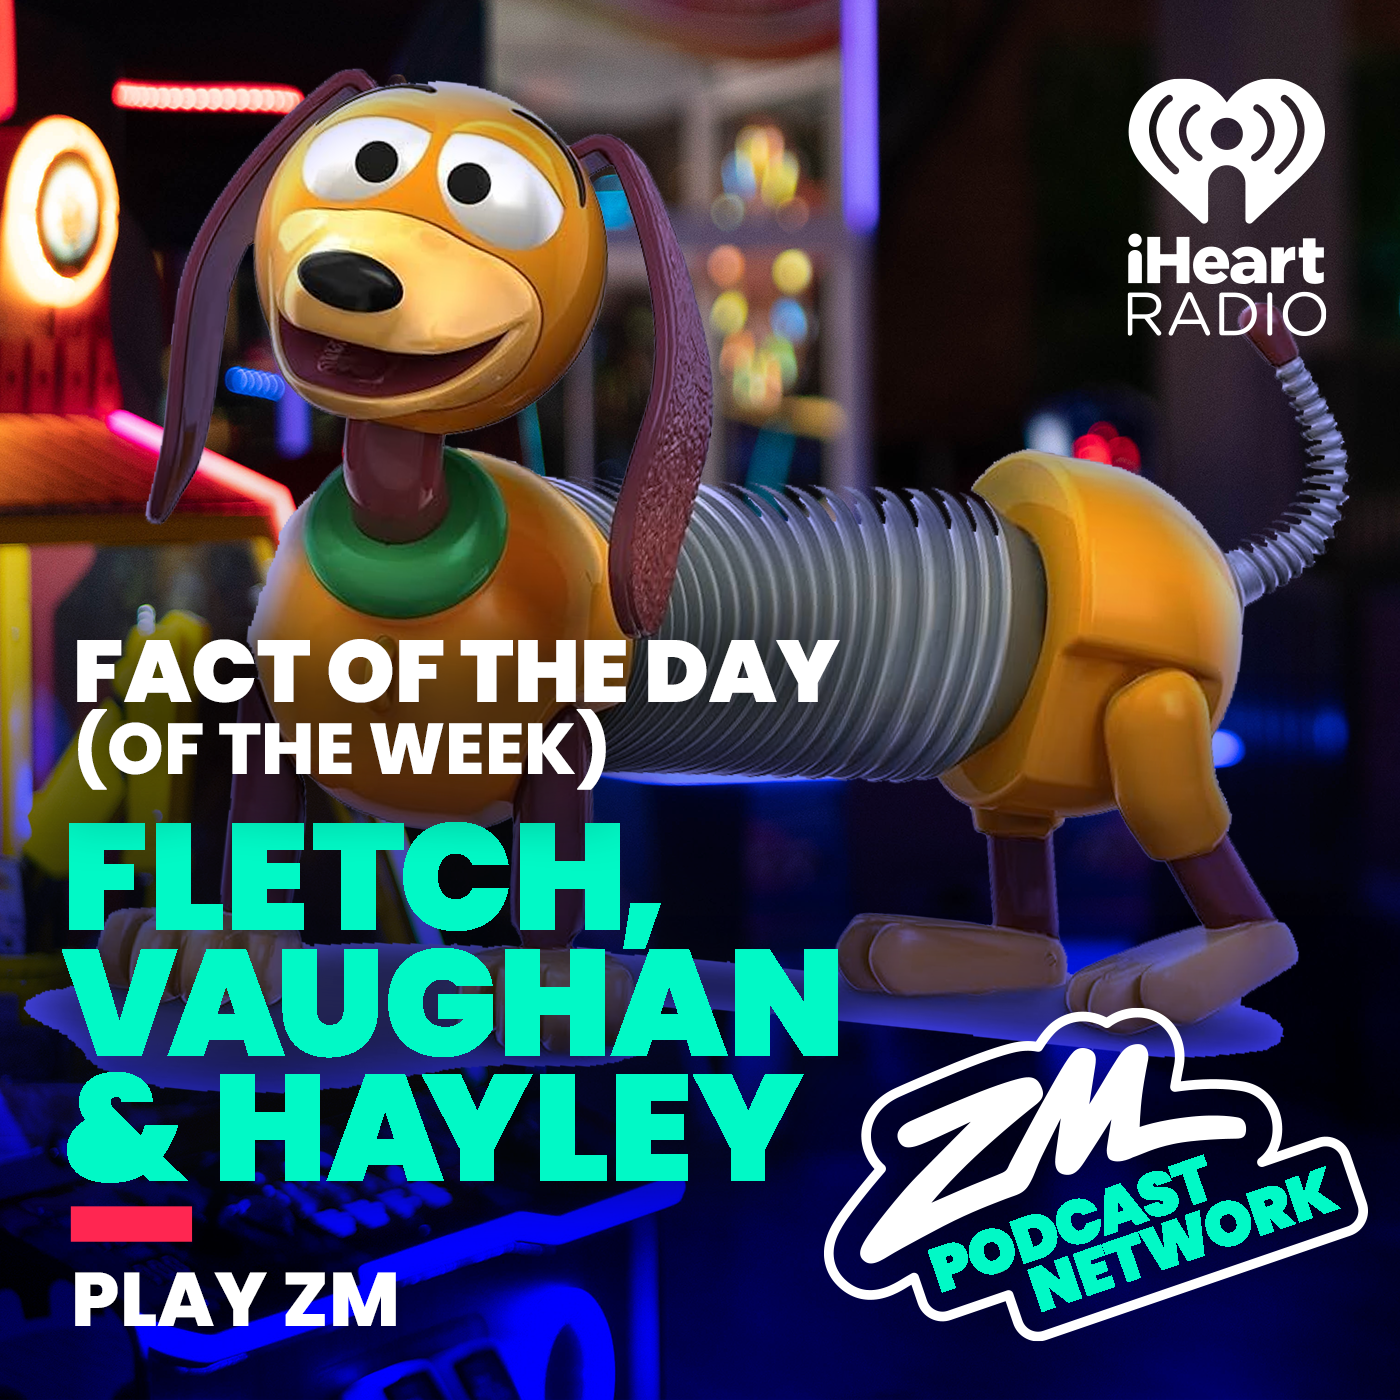 Fletch, Vaughan & Hayley’s Fact of the Day (of the Week!) - Accidental Inventions!